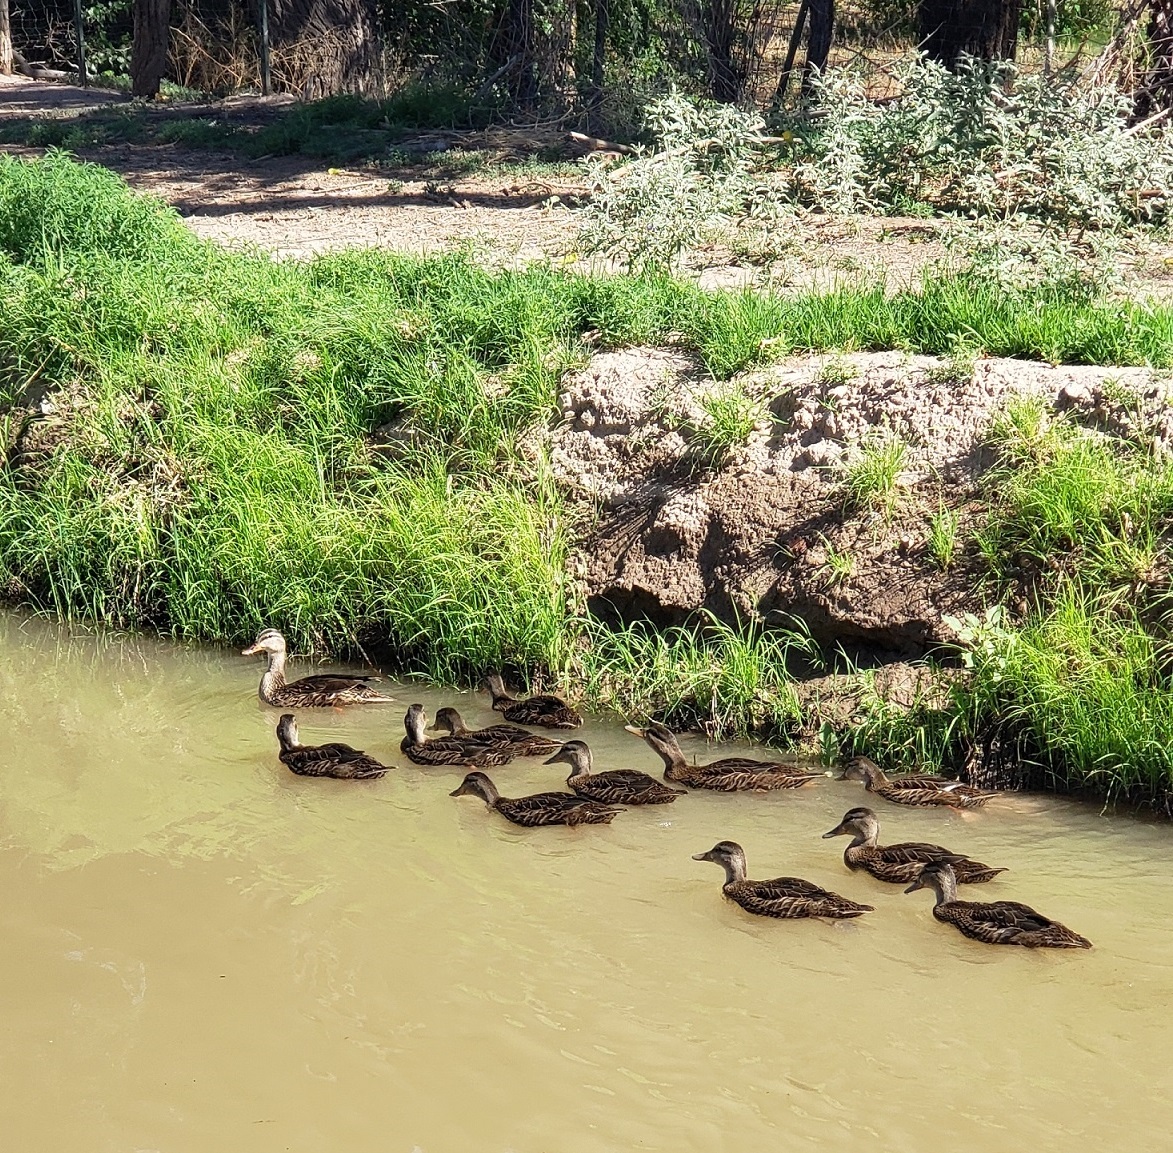 Ducks in Mesilla's acequia madre (main irrigation ditch) to the west of the Taylor-Mesilla Historic Property.